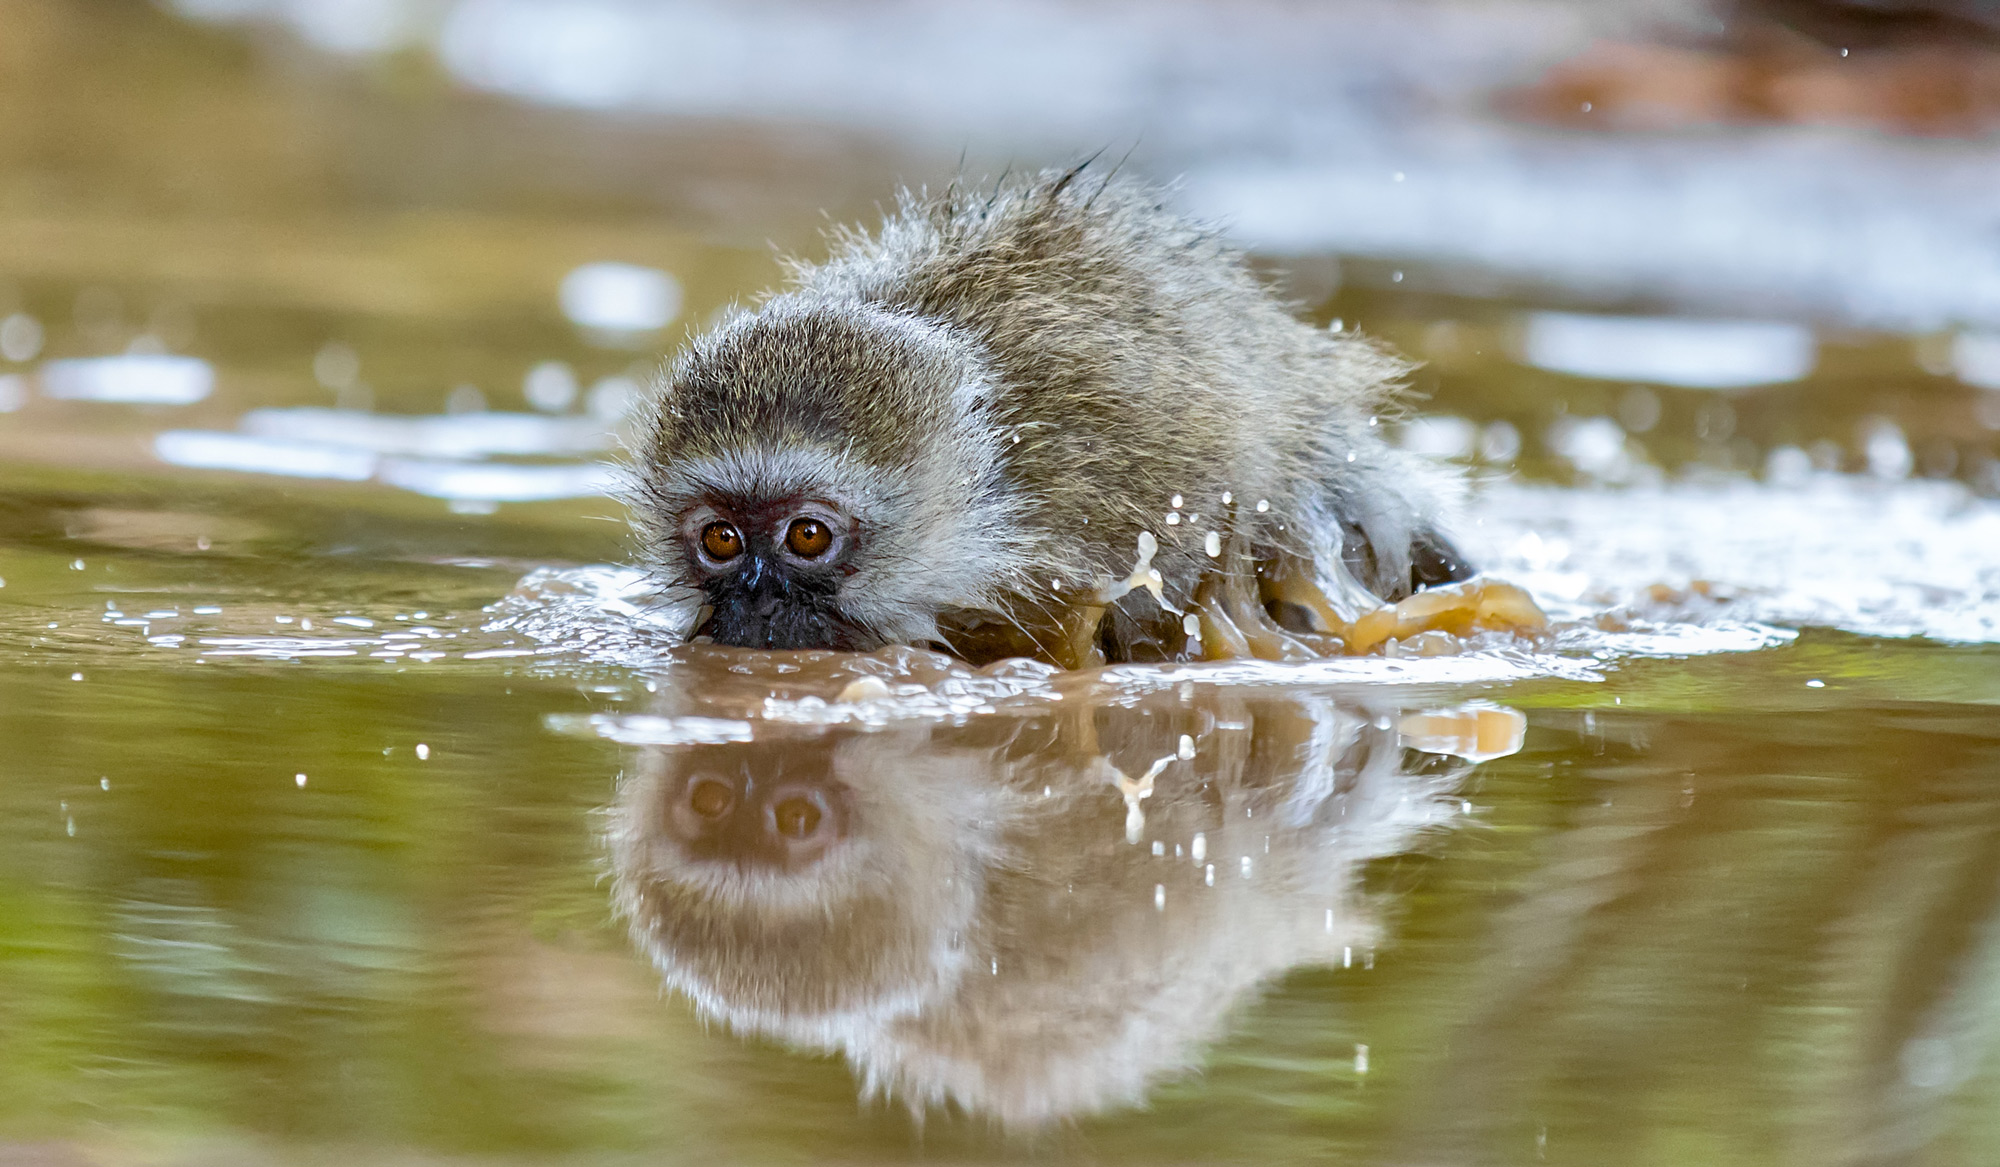 “Monkey submarine” – a juvenile vervet monkey plays in a puddle of rainwater in Kruger National Park, South Africa